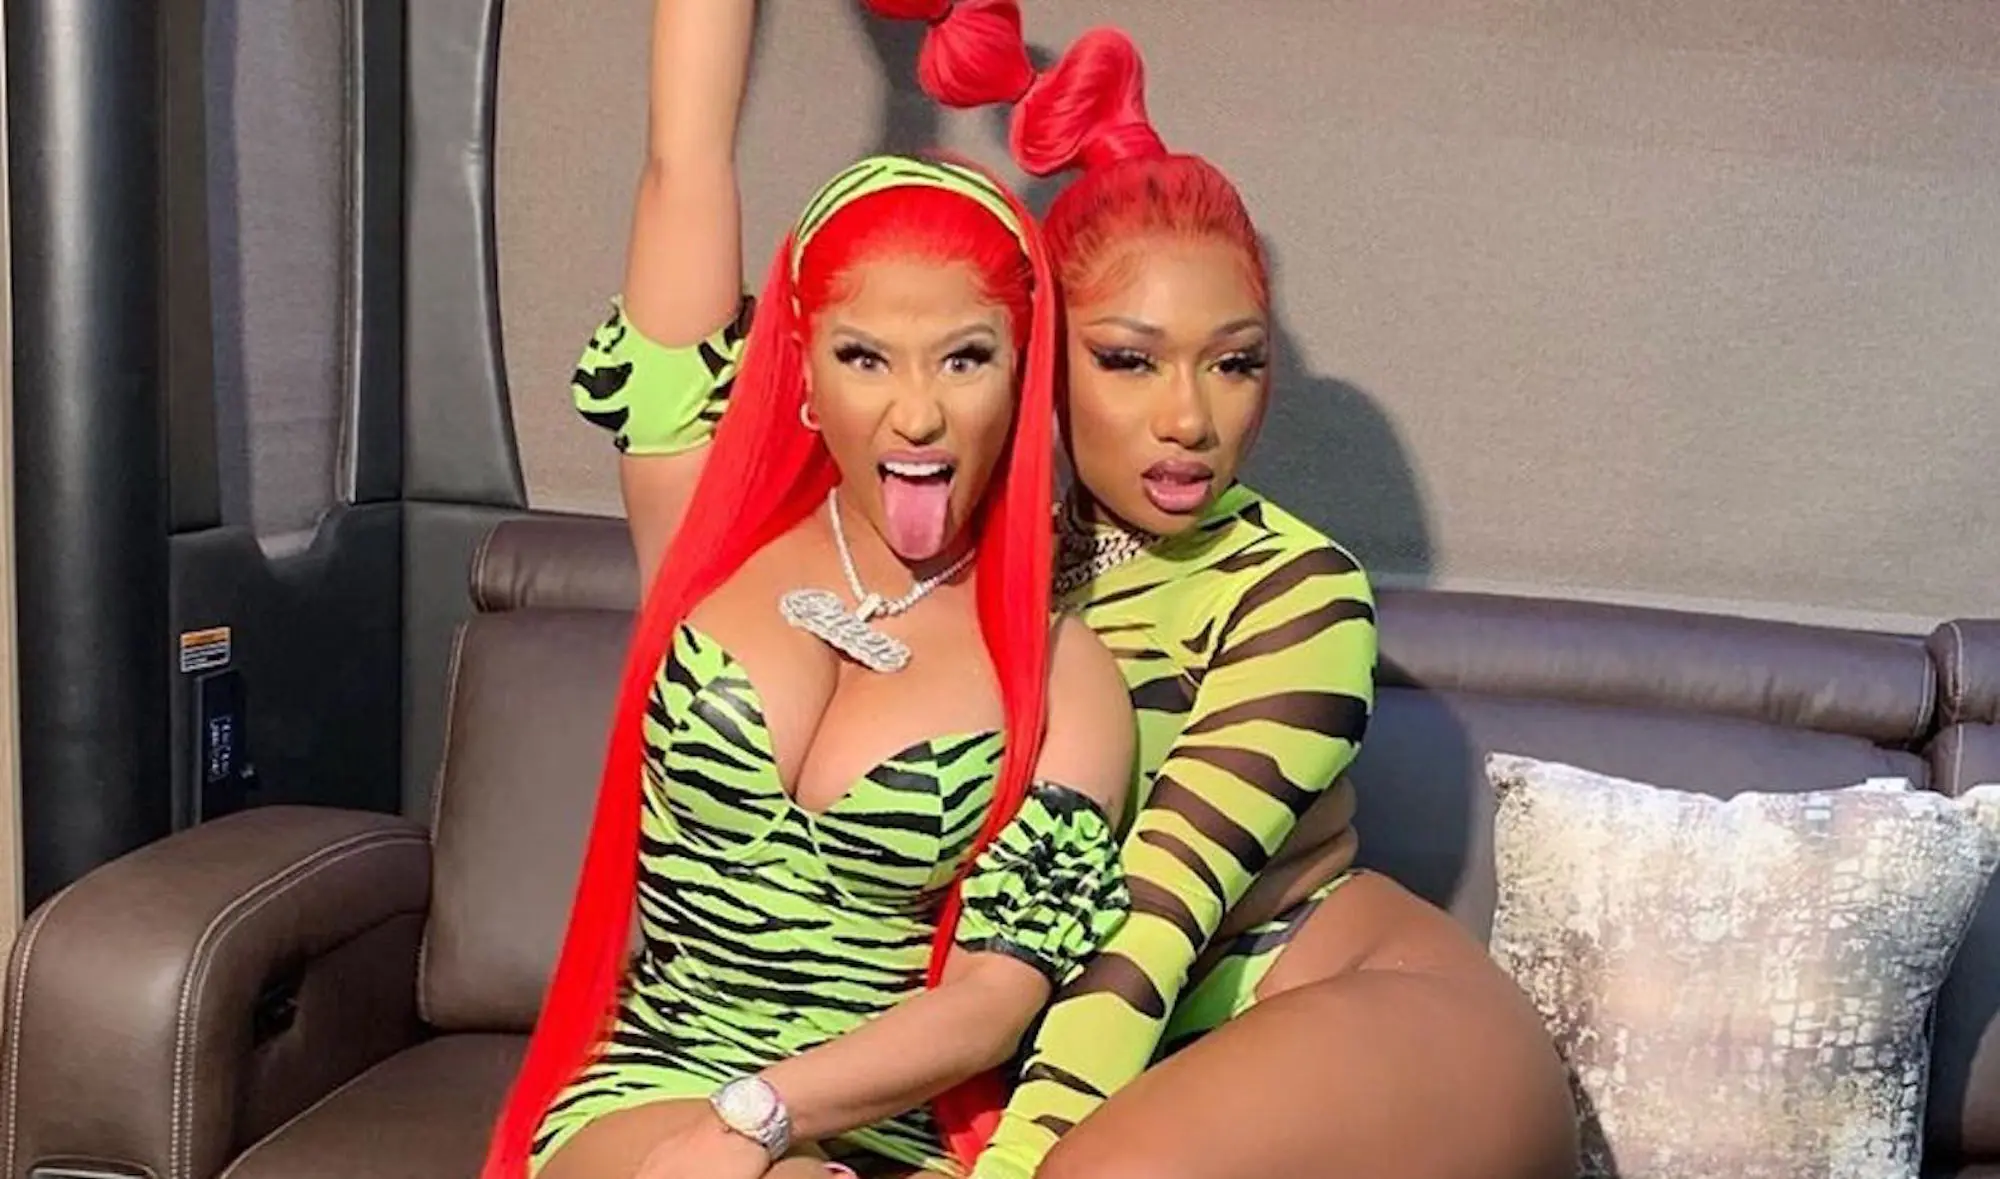 Nicki Minaj accused Megan Thee Stallion indirectly of asking her to get an abortion when she was pregnant